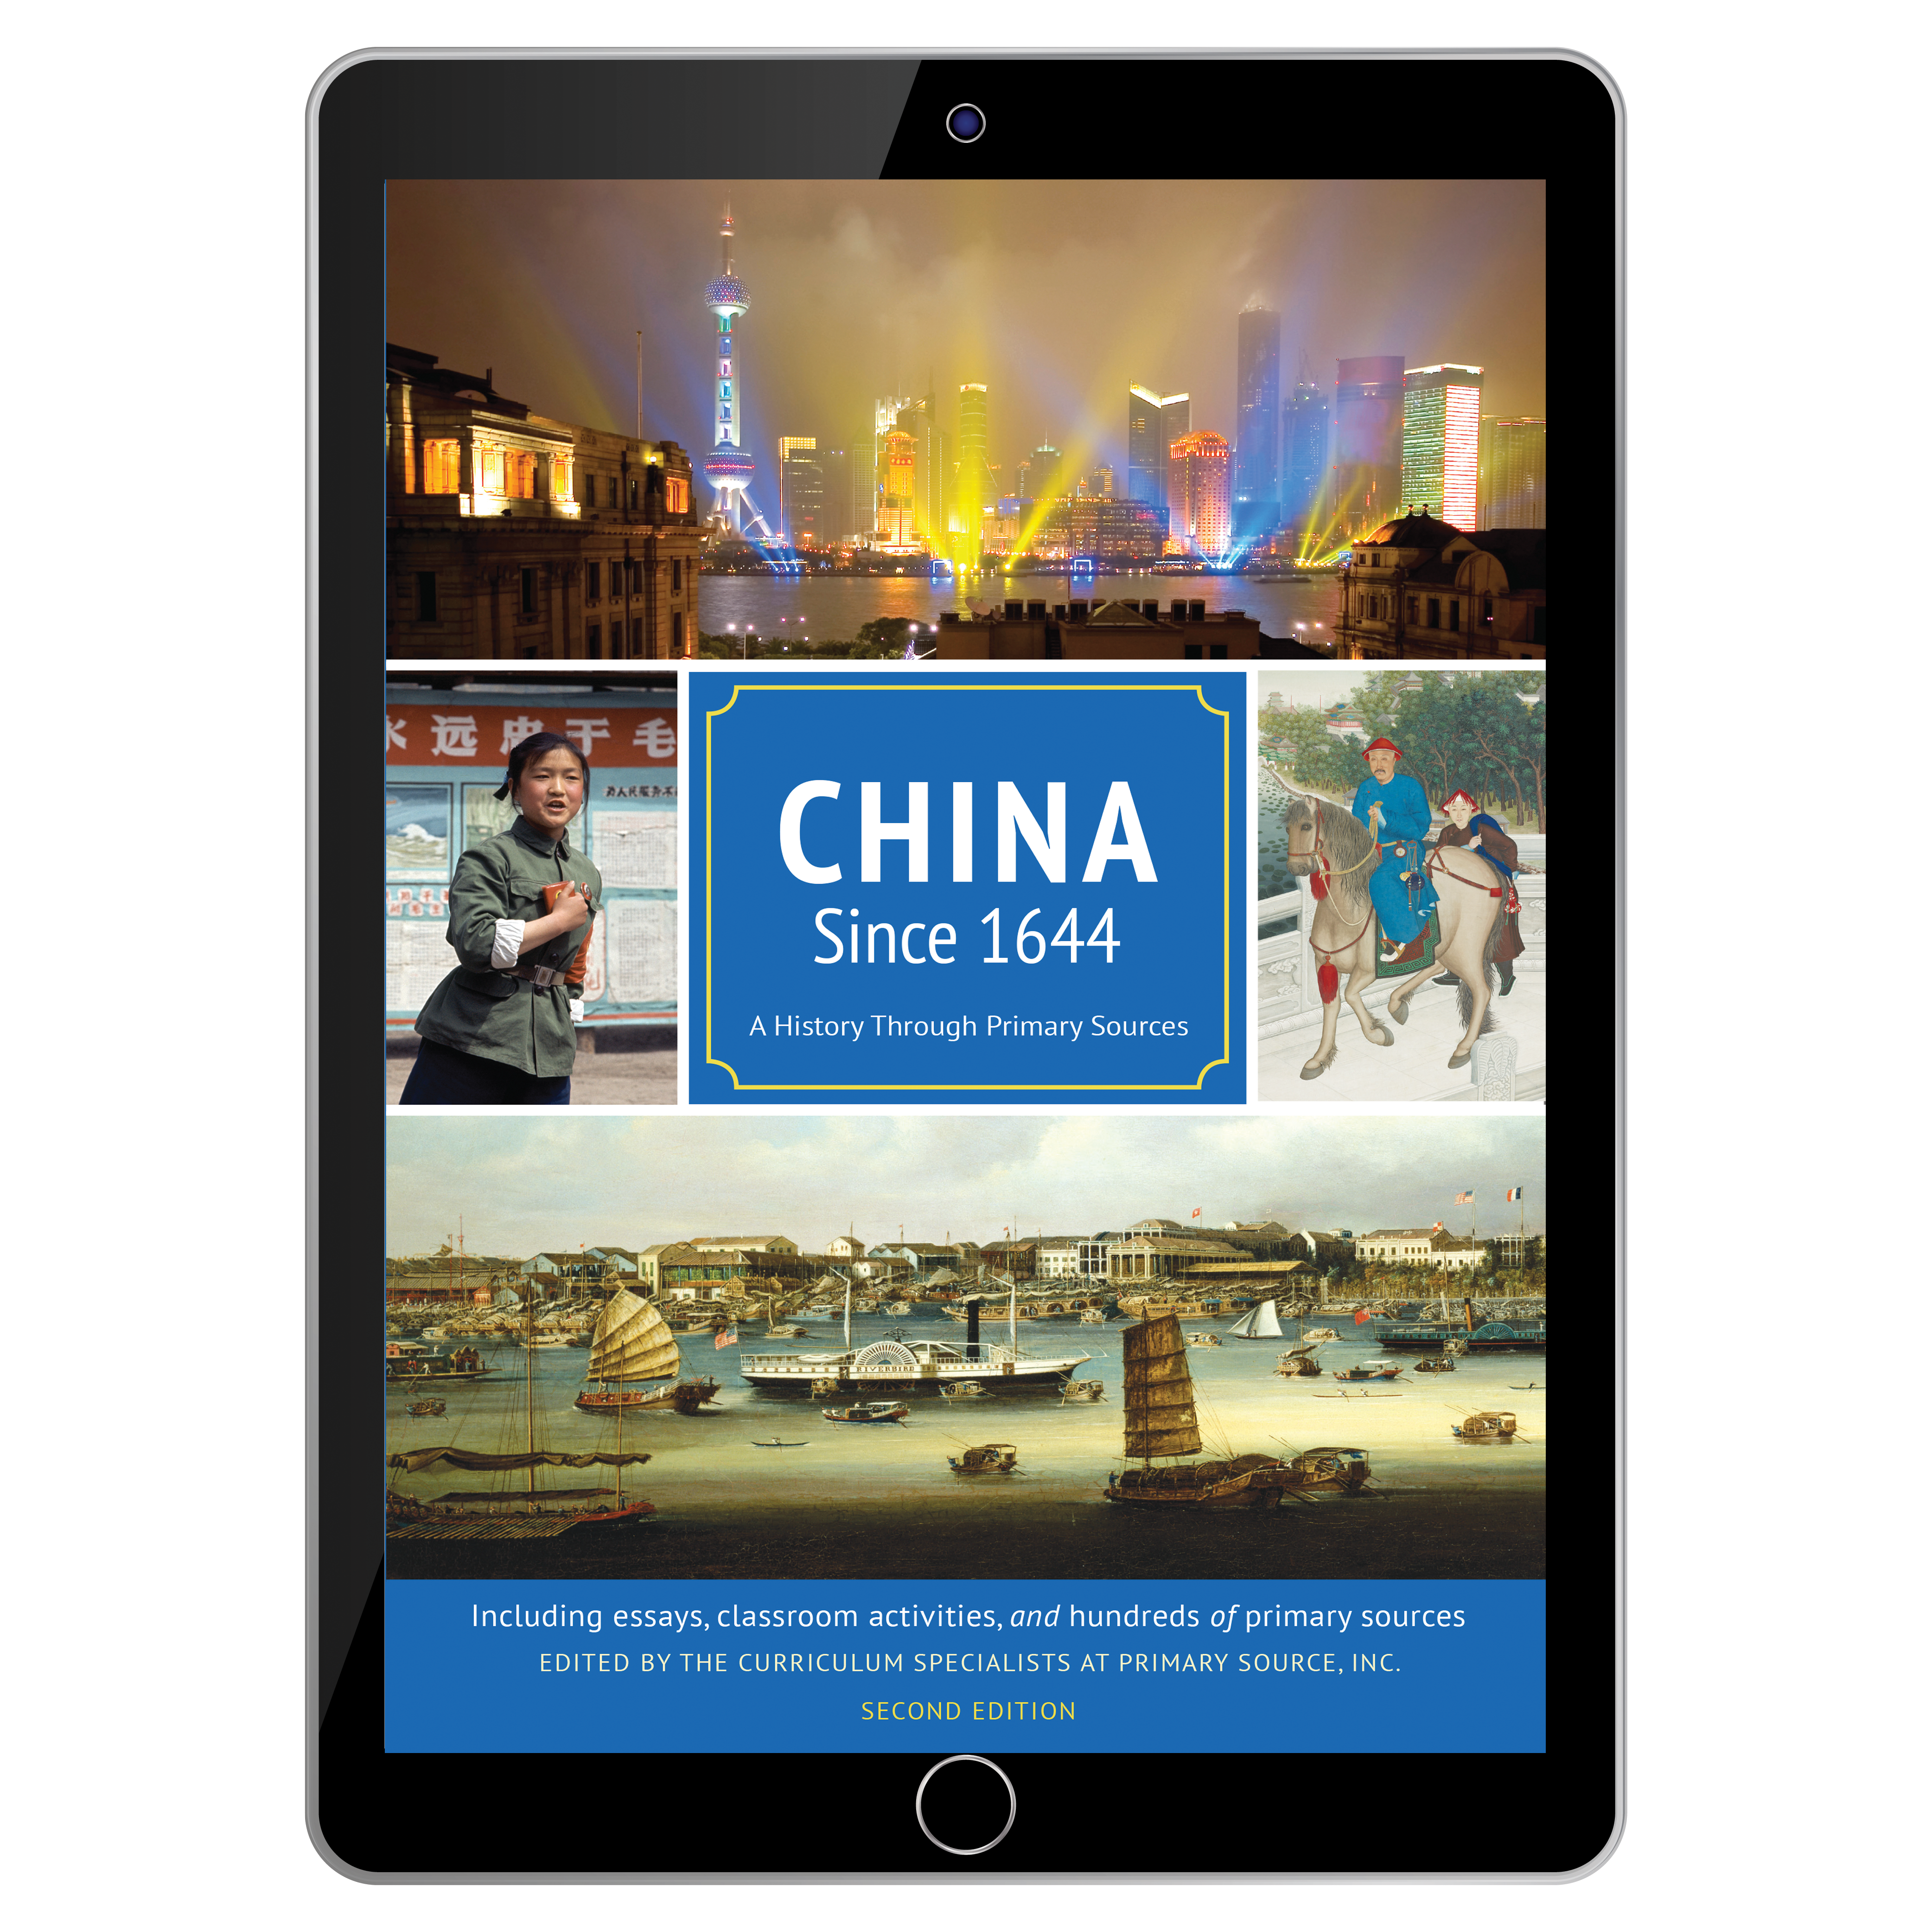 China Since 1644 cover shown on a black tablet screen.